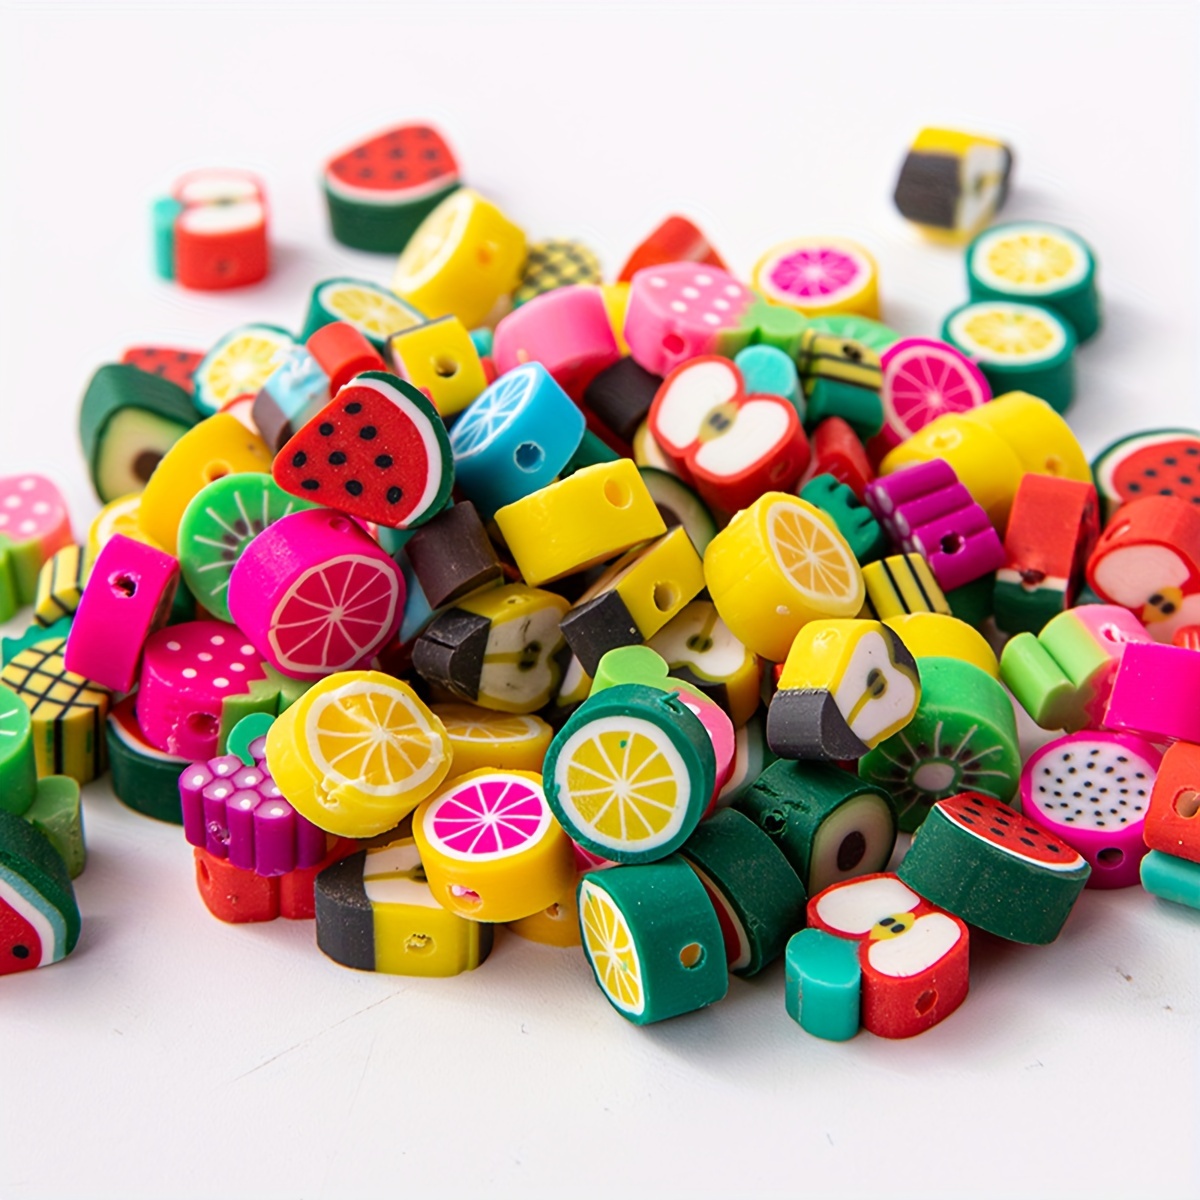 480PCS Fruit Flower Polymer Clay Beads, 24 Style Cute Smiley Heart Mushroom  Clay Beads Charms For Jewelry Necklace Earring Making, DIY Bracelet Making